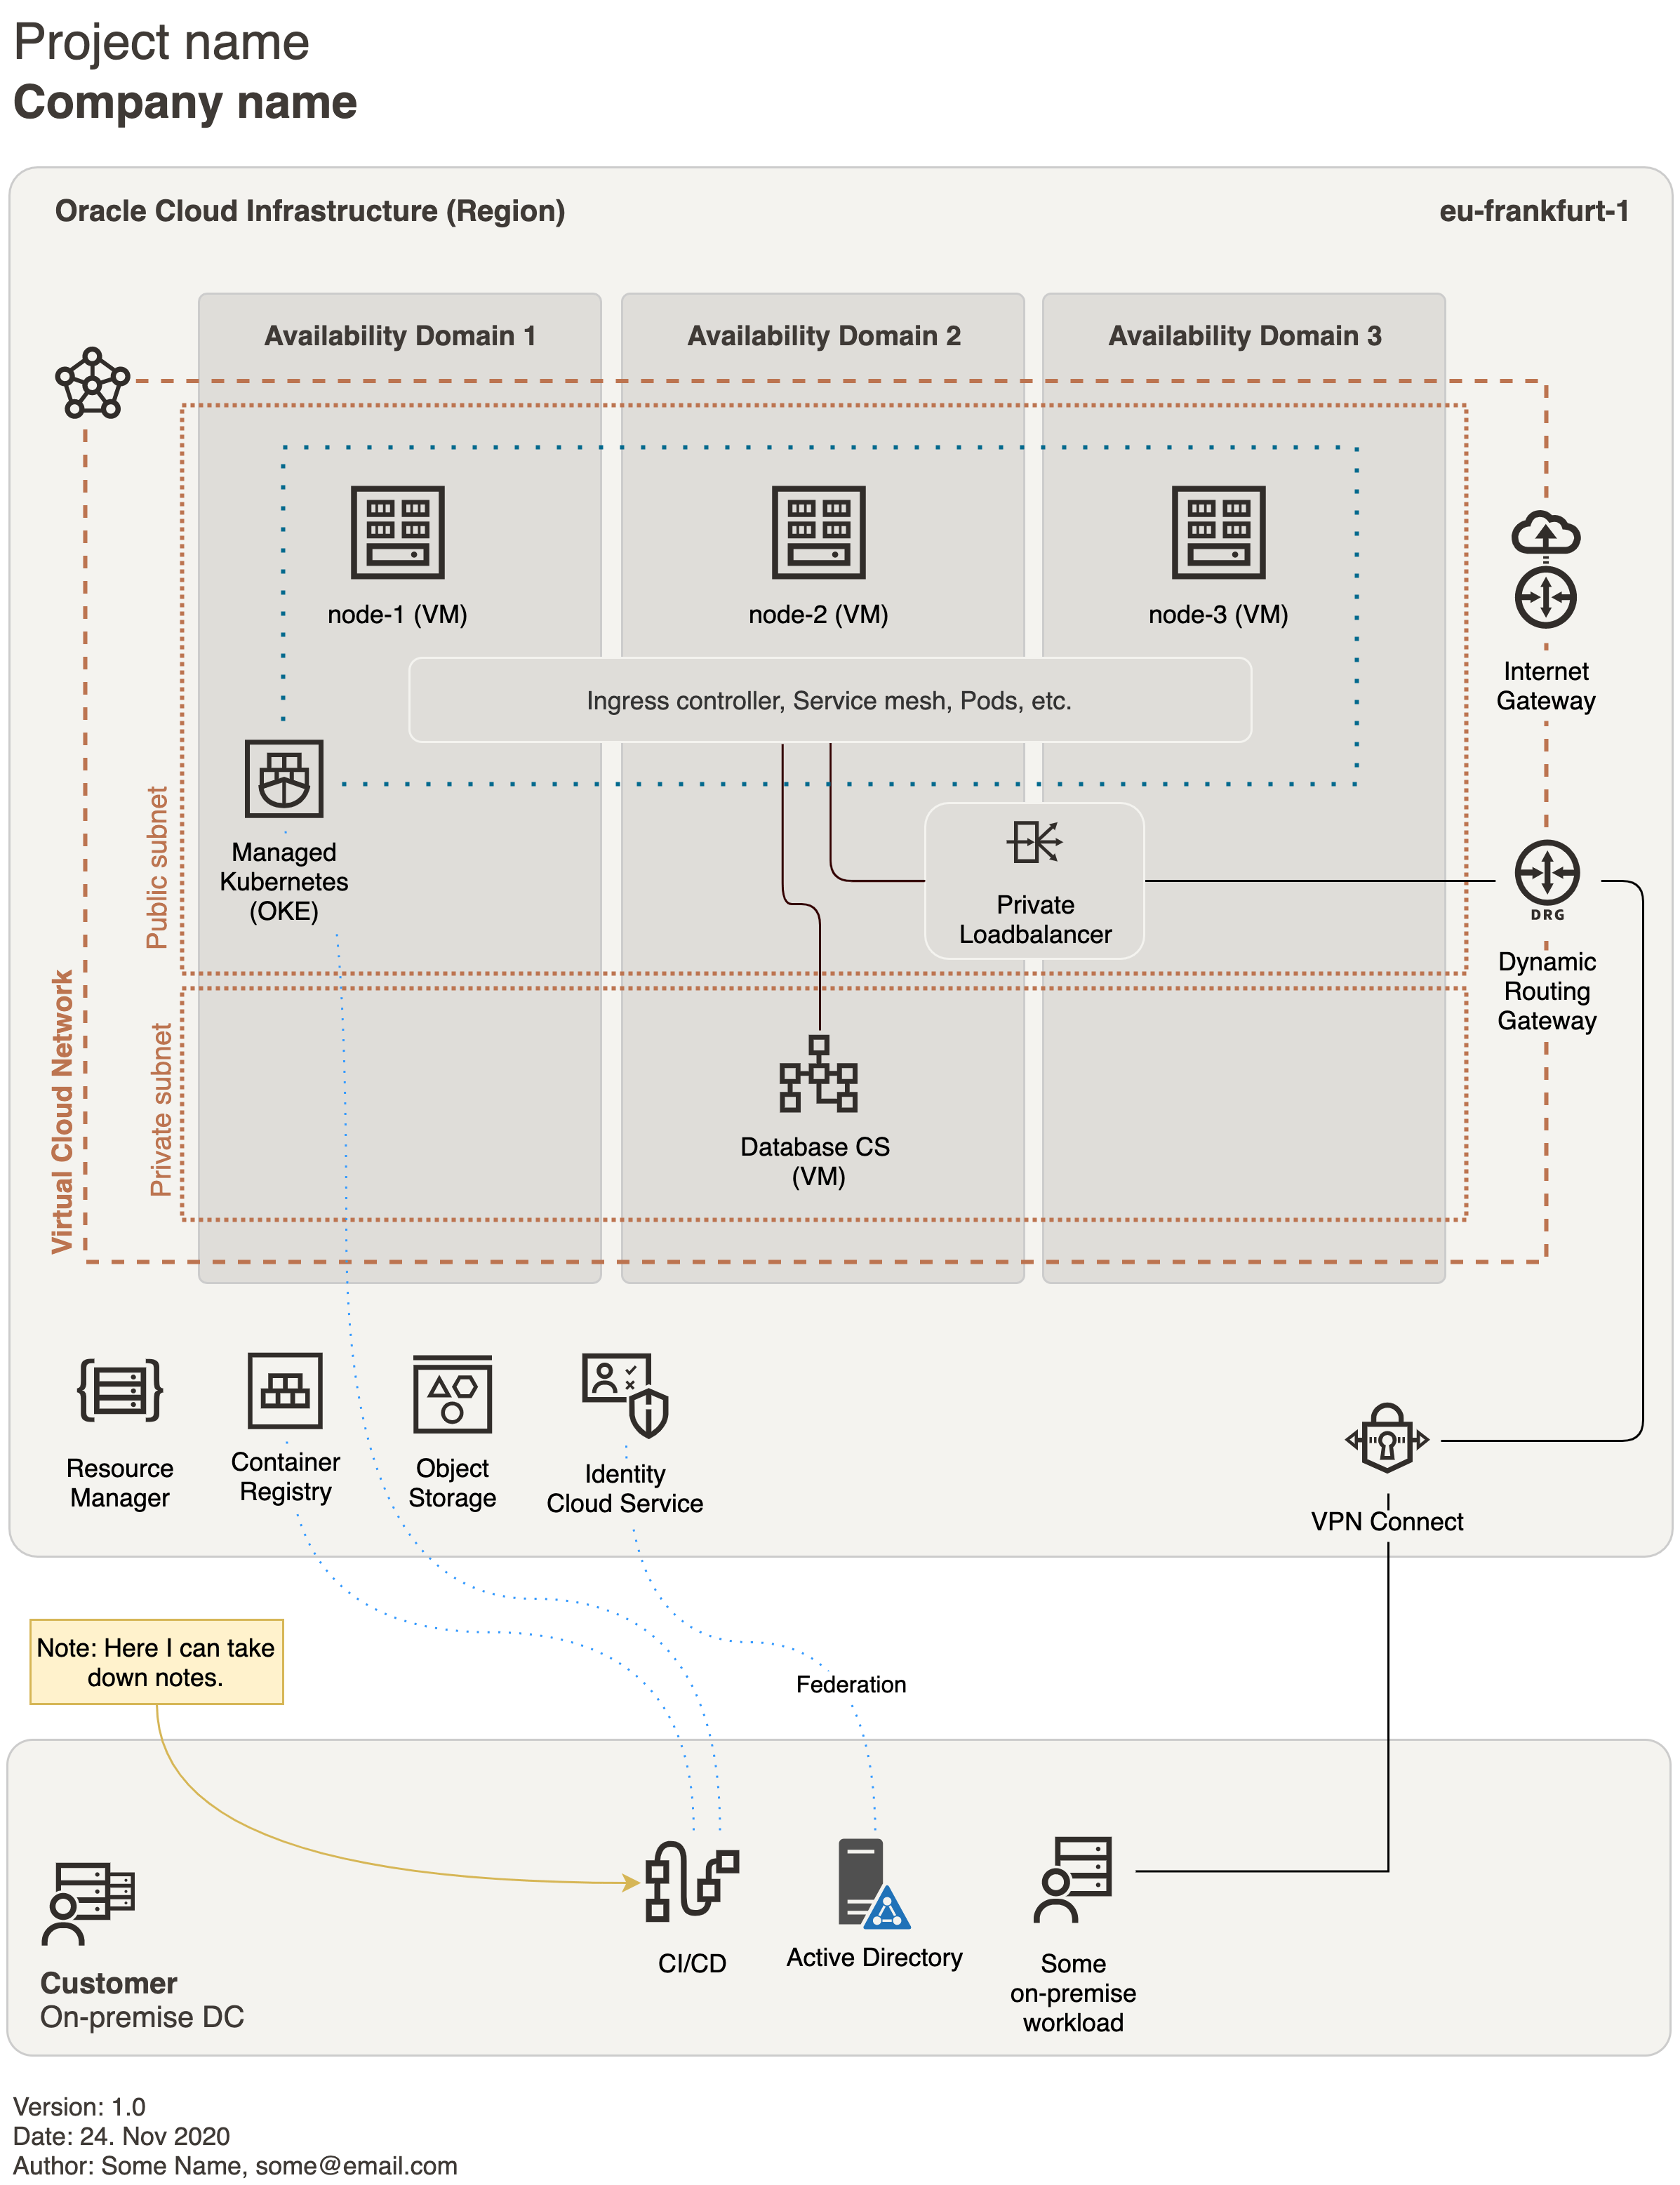 OCI sample architecture made with draw.io